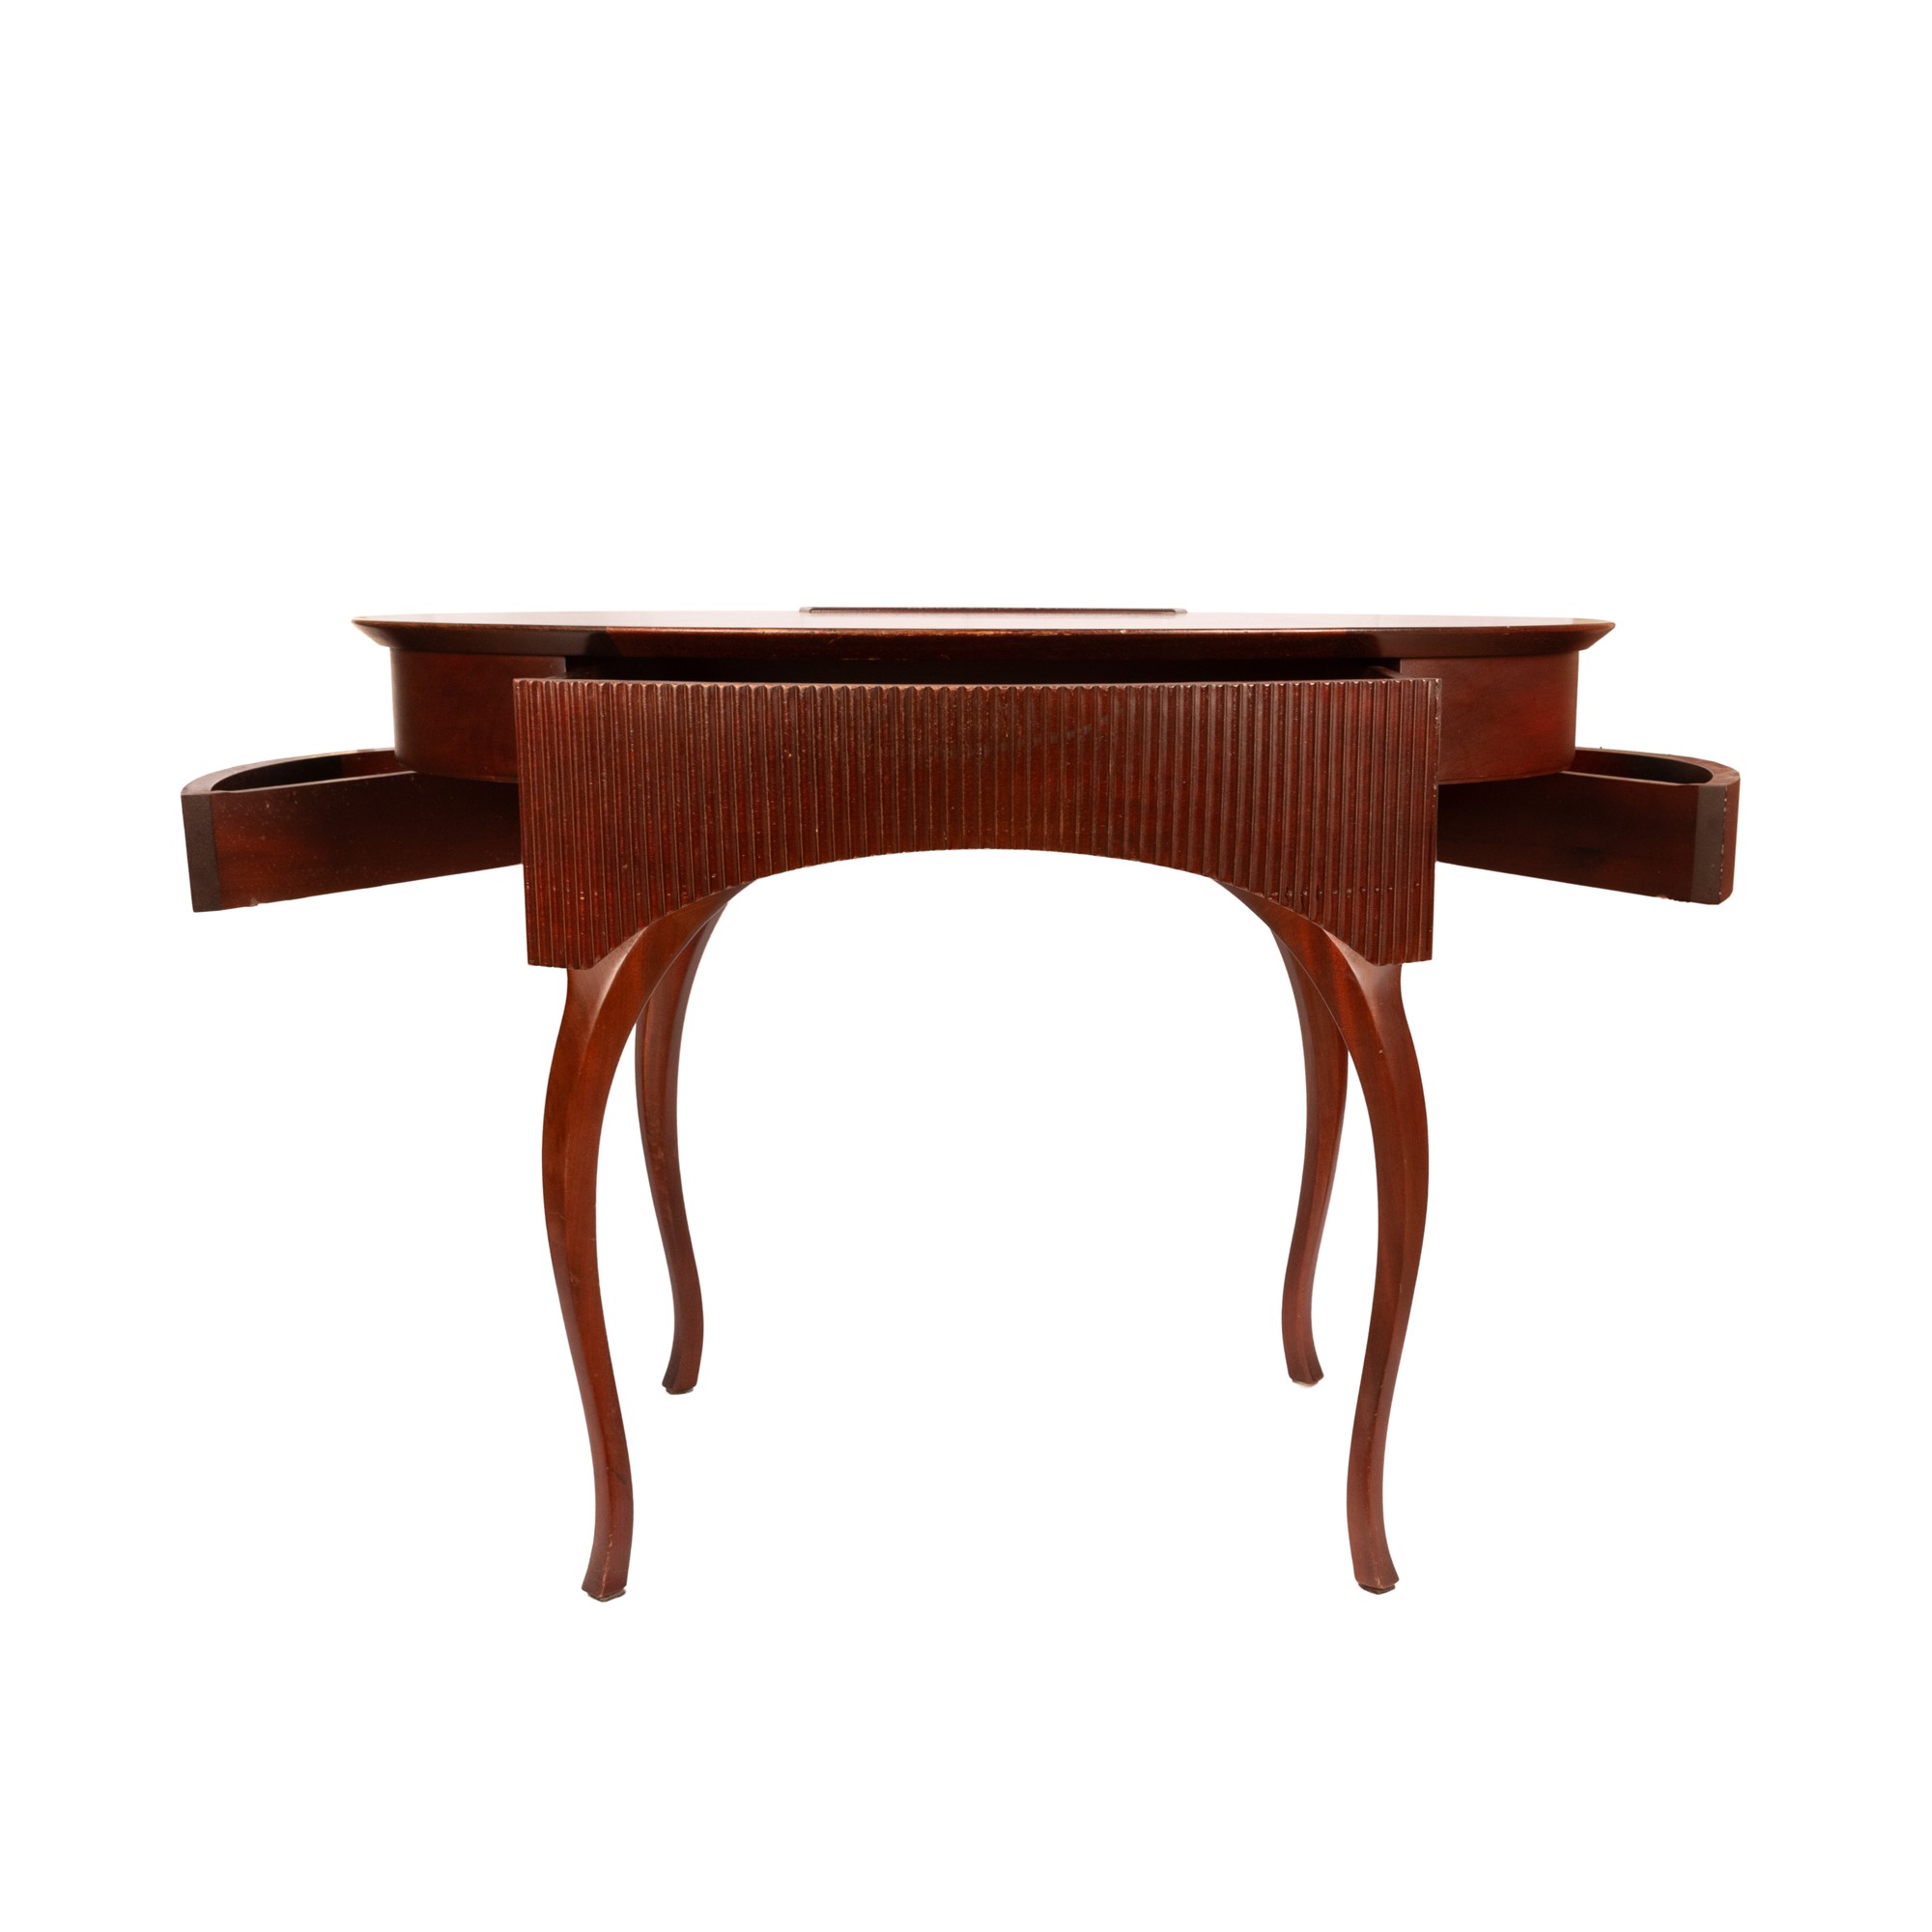 Writing desk in cherry wood - Image 8 of 25